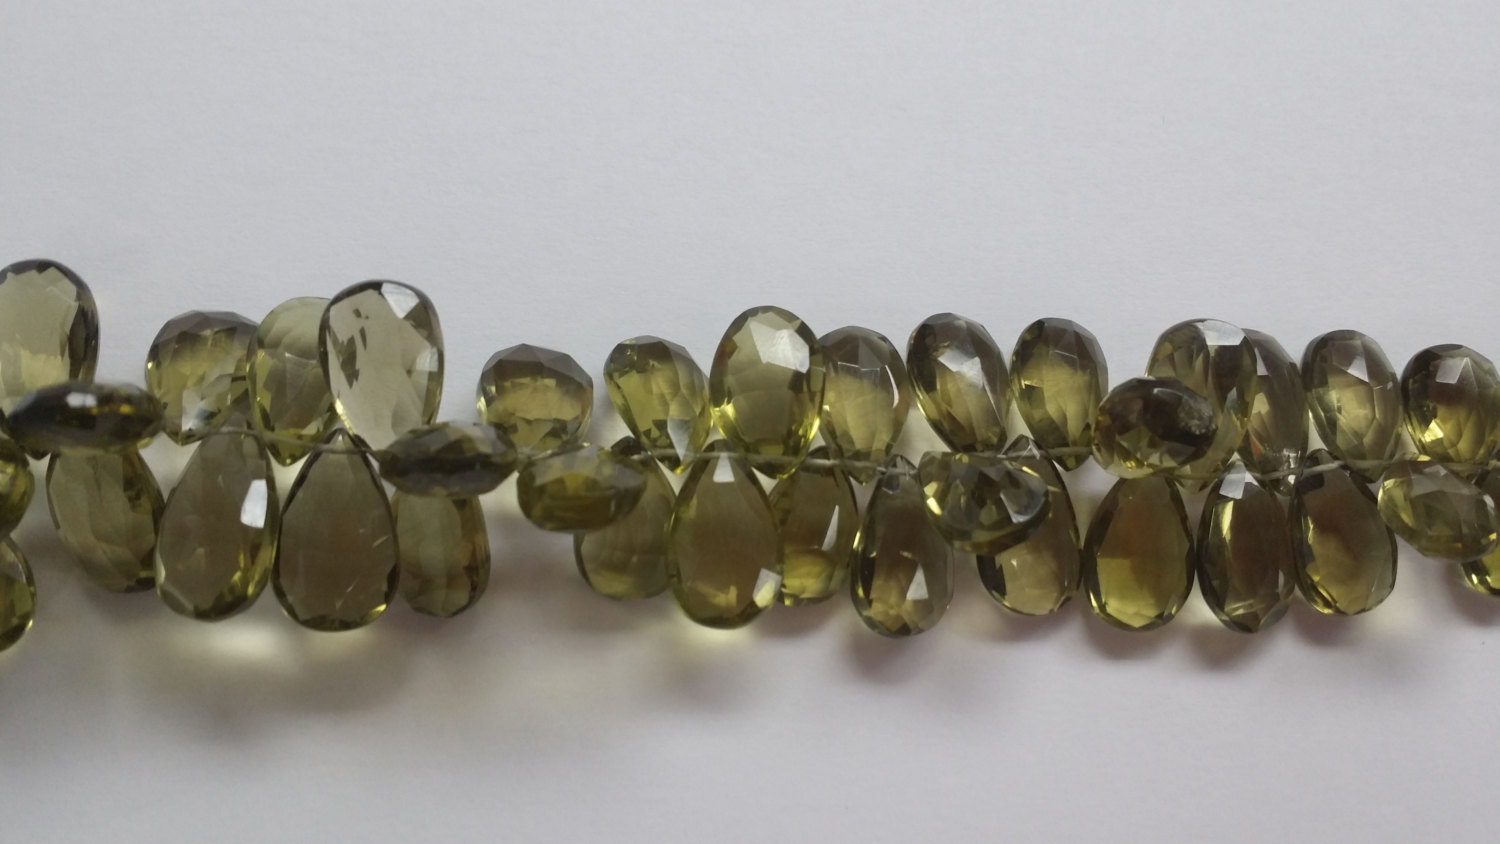 NATURAL Olive Green Hydro Quartz Pears Faceted